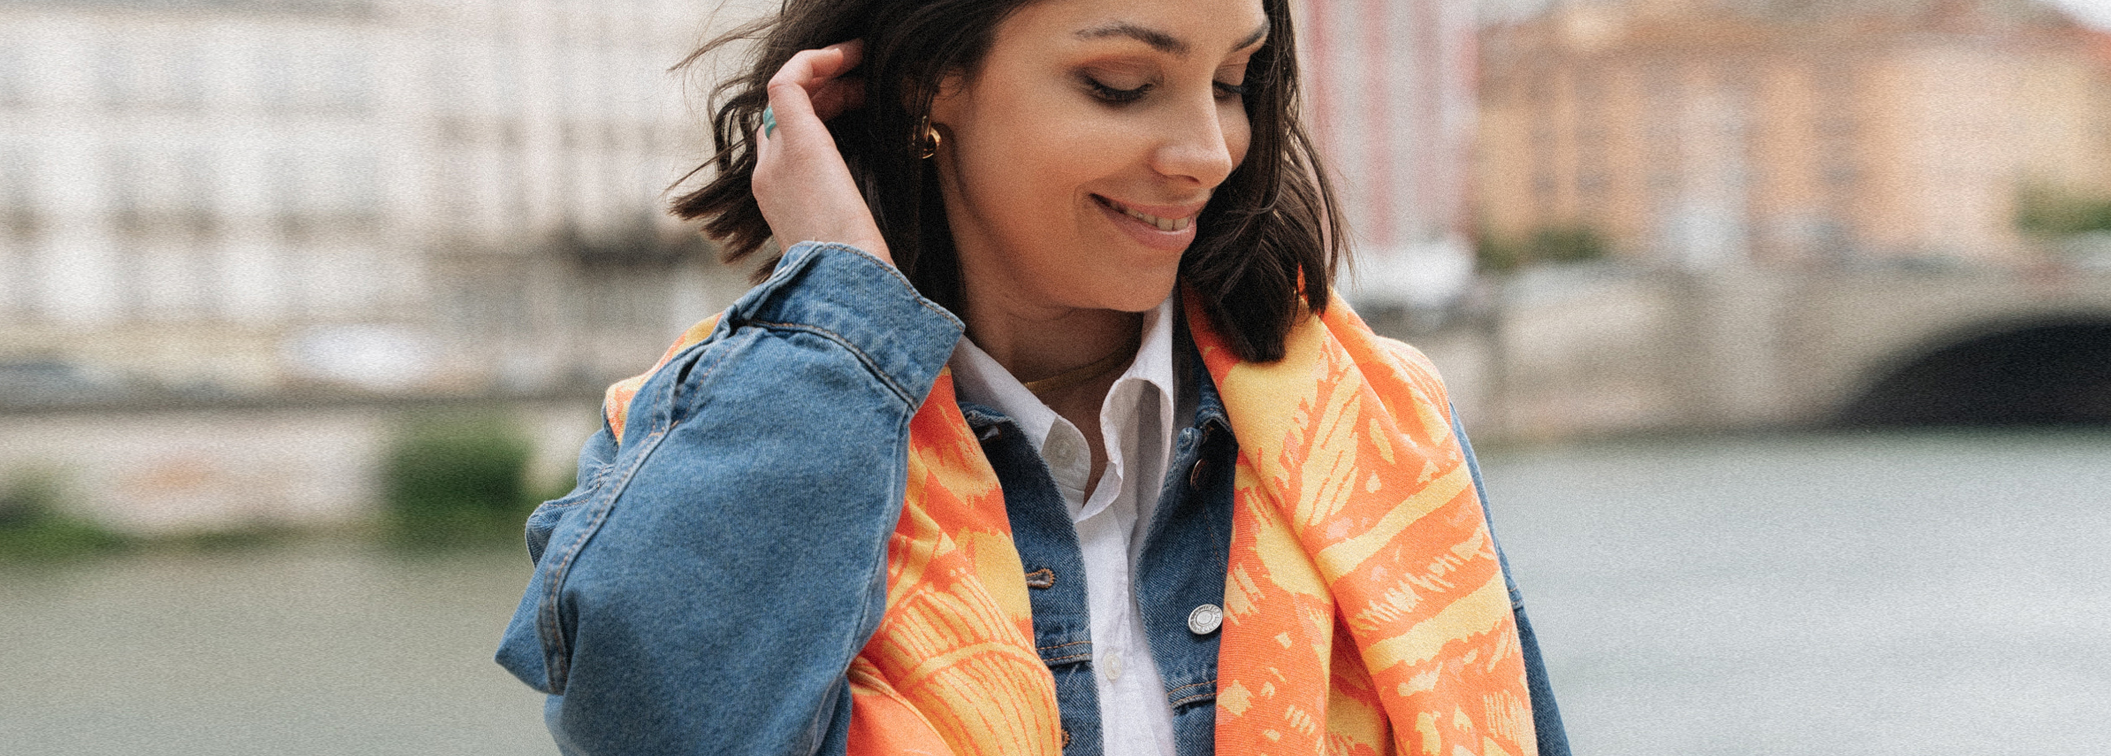 Scarves as fashion accessories to help you stand out from the crowd￼